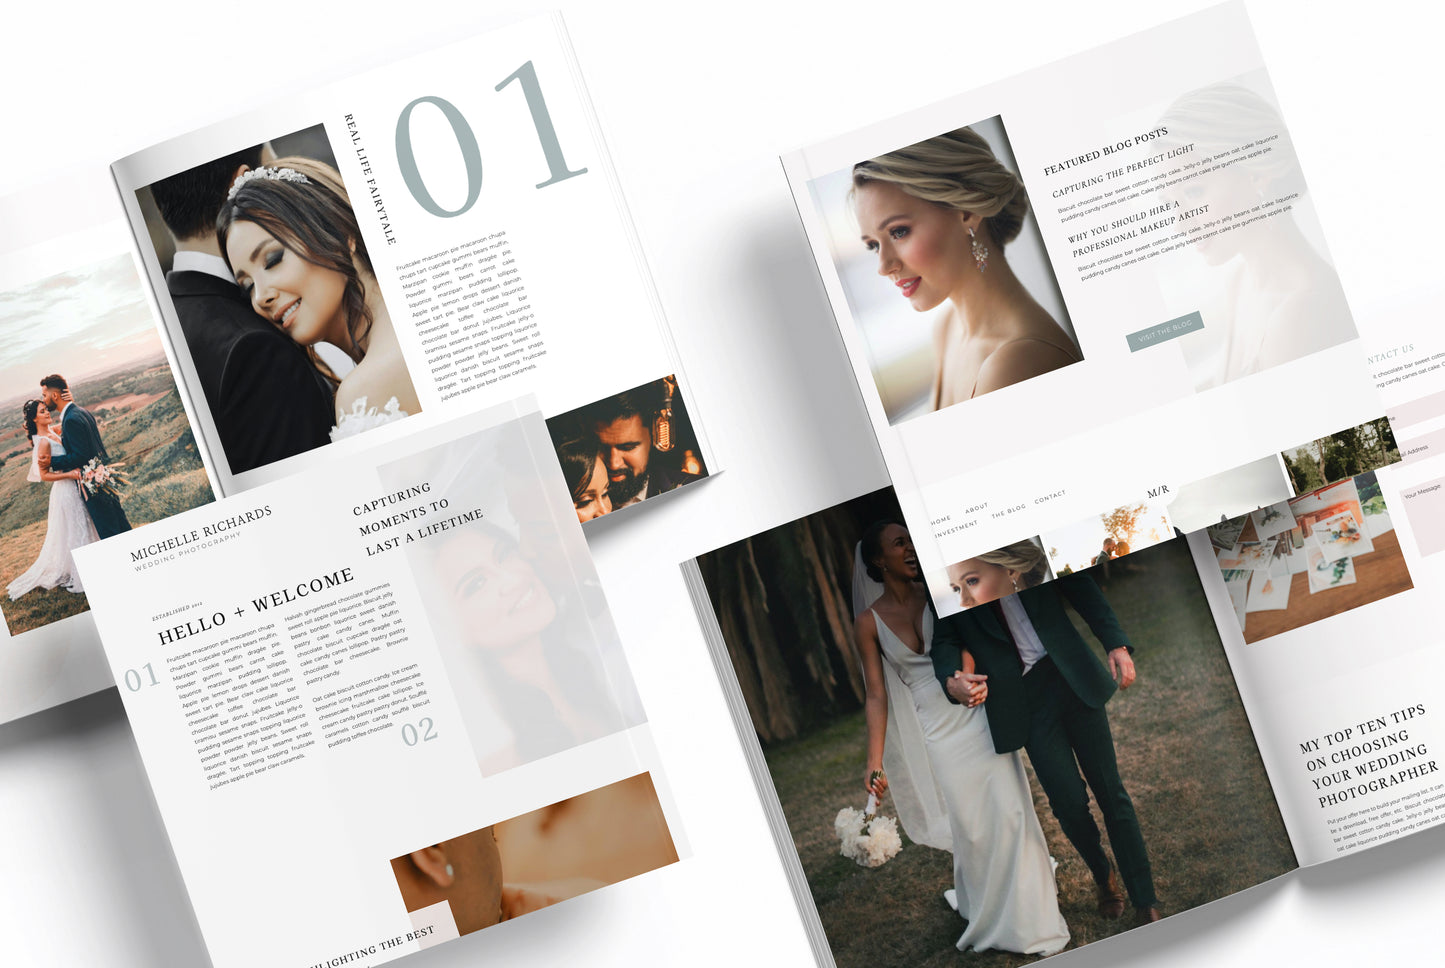 The "Michelle Richards" Showit Template by Taaenoelle + Co.